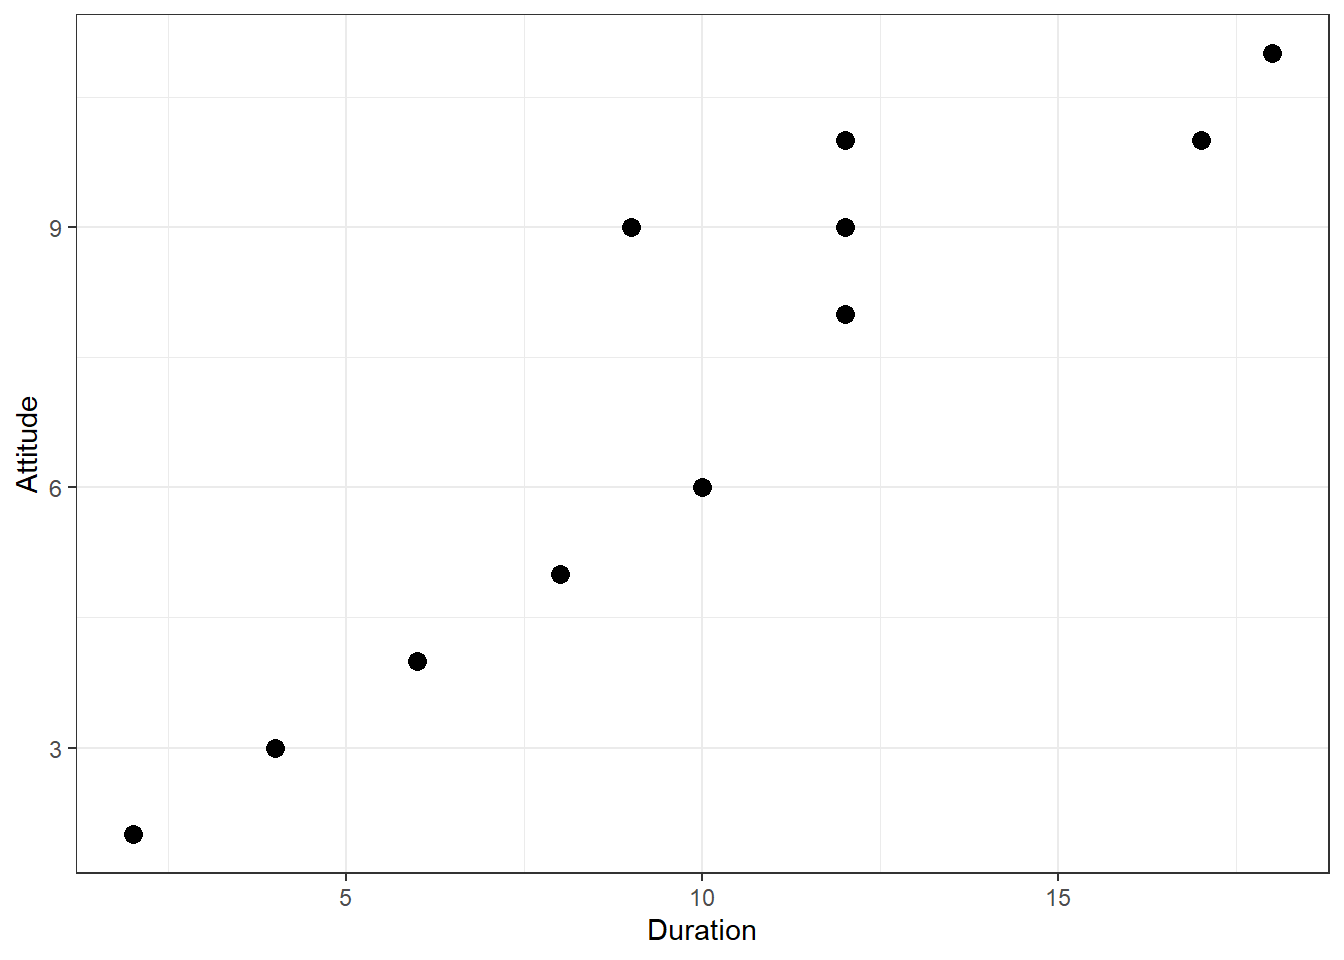 Scatterplot for duration and attitute variables